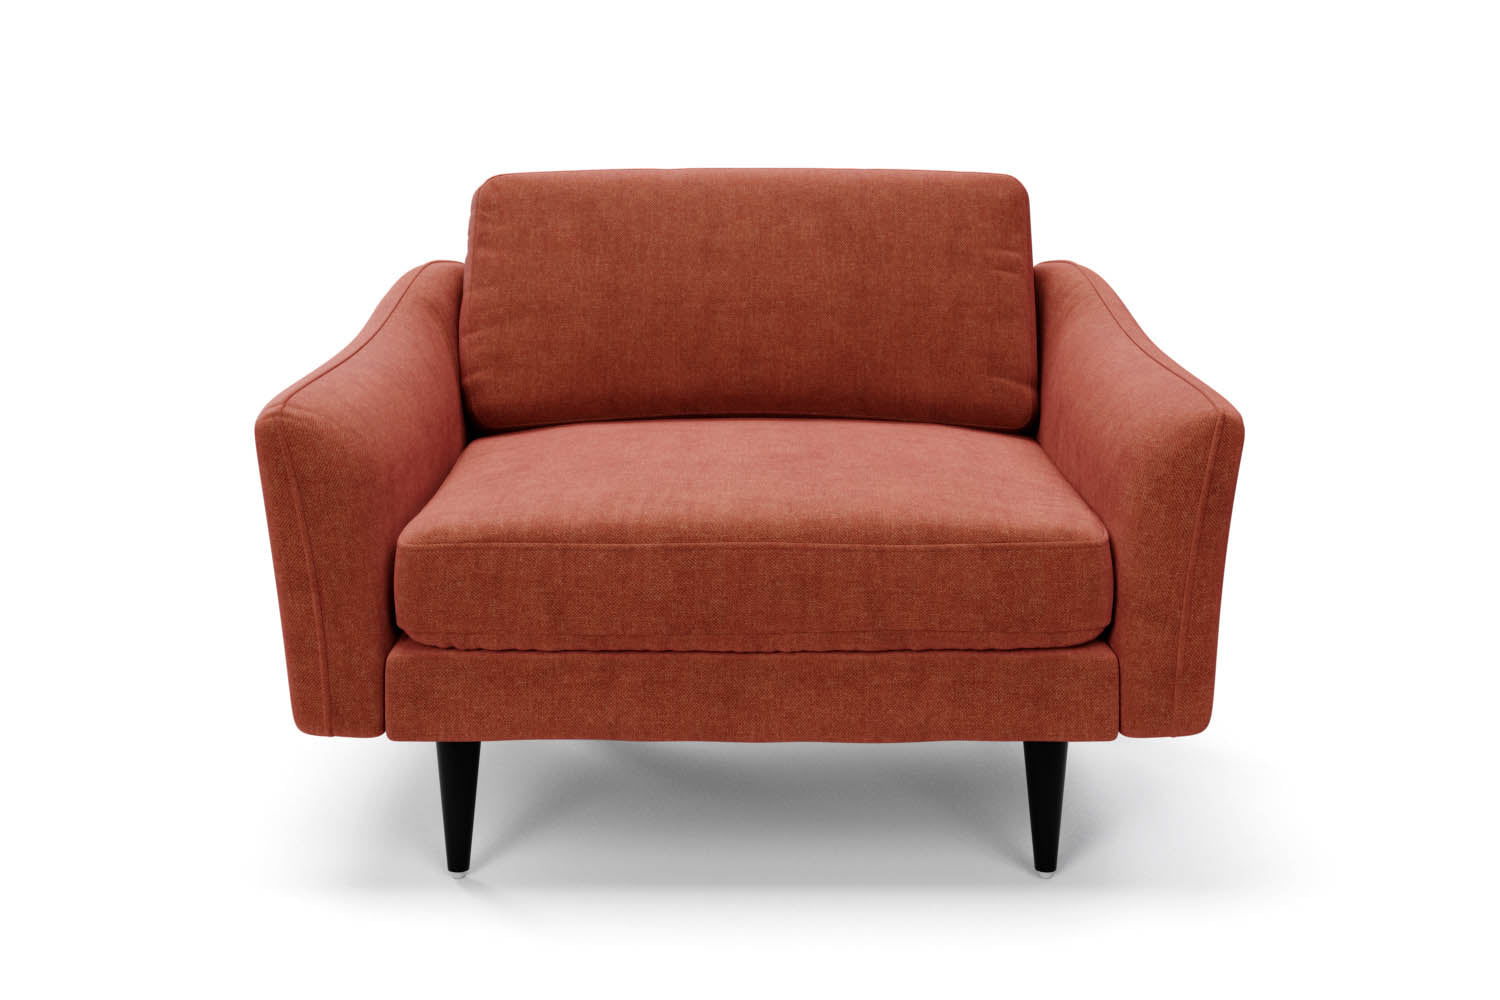 The Rebel Snuggler Sofa in Spice with black legs front variant_40886275866672